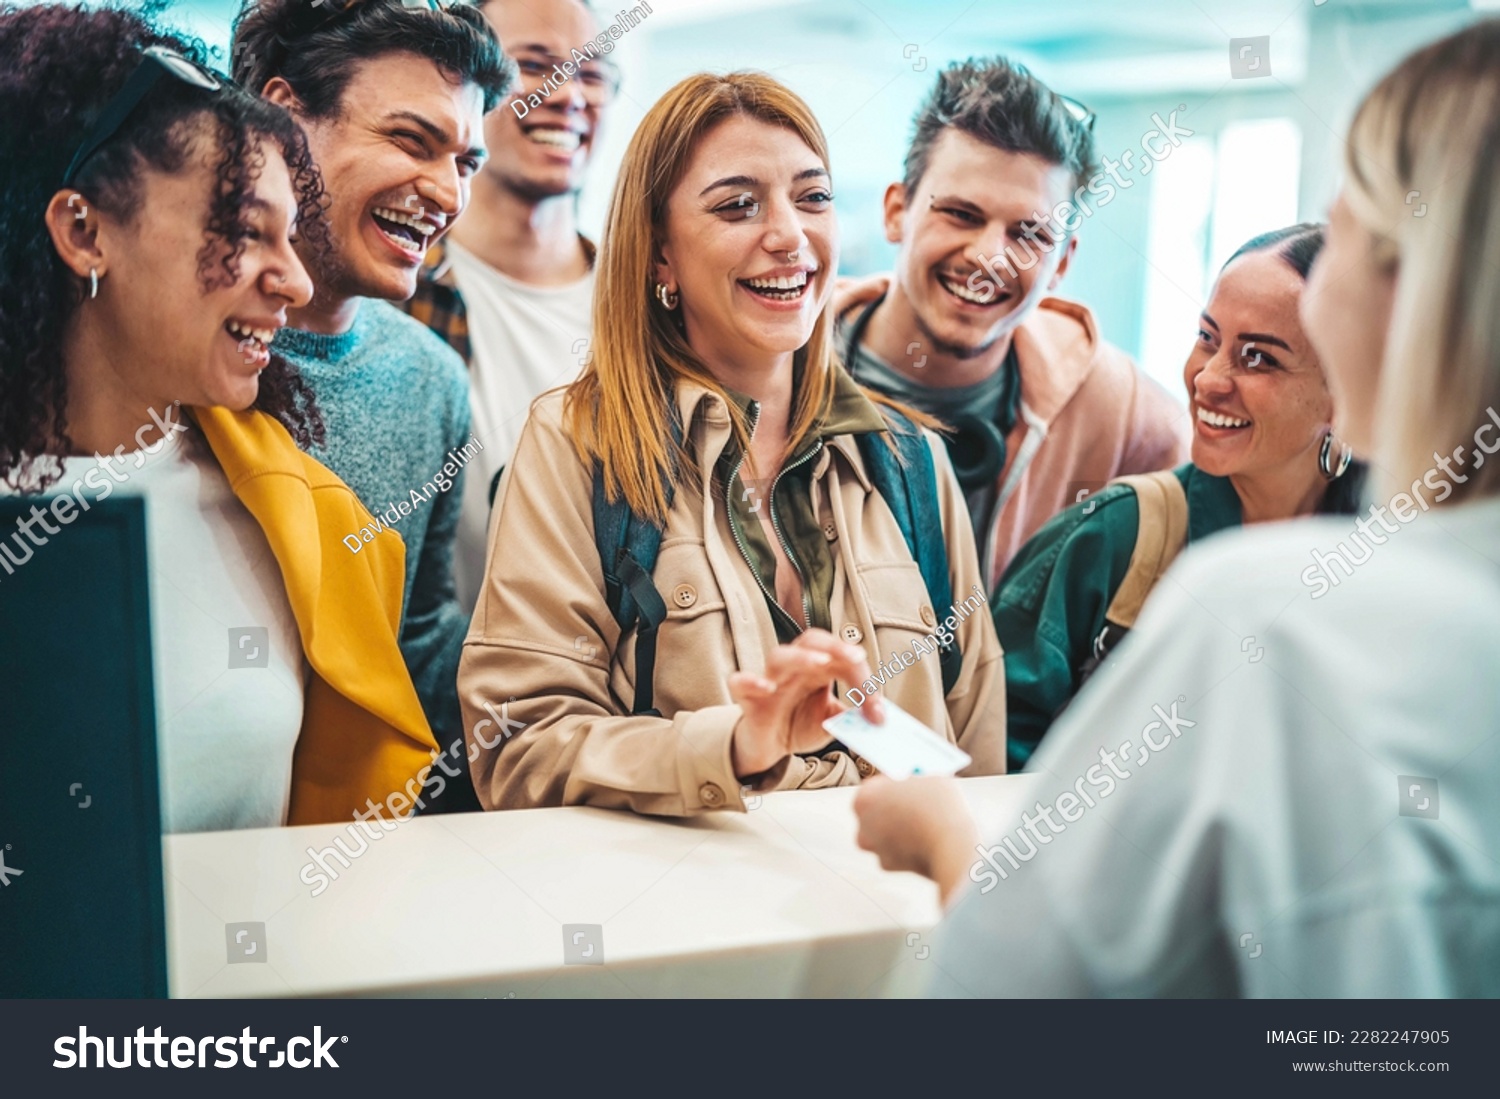 Group of young people takes room key card at check-in of youth hostel guest house - Happy tourists talking with receptionist at hotel lobby - Summer vacations and tourism concept #2282247905